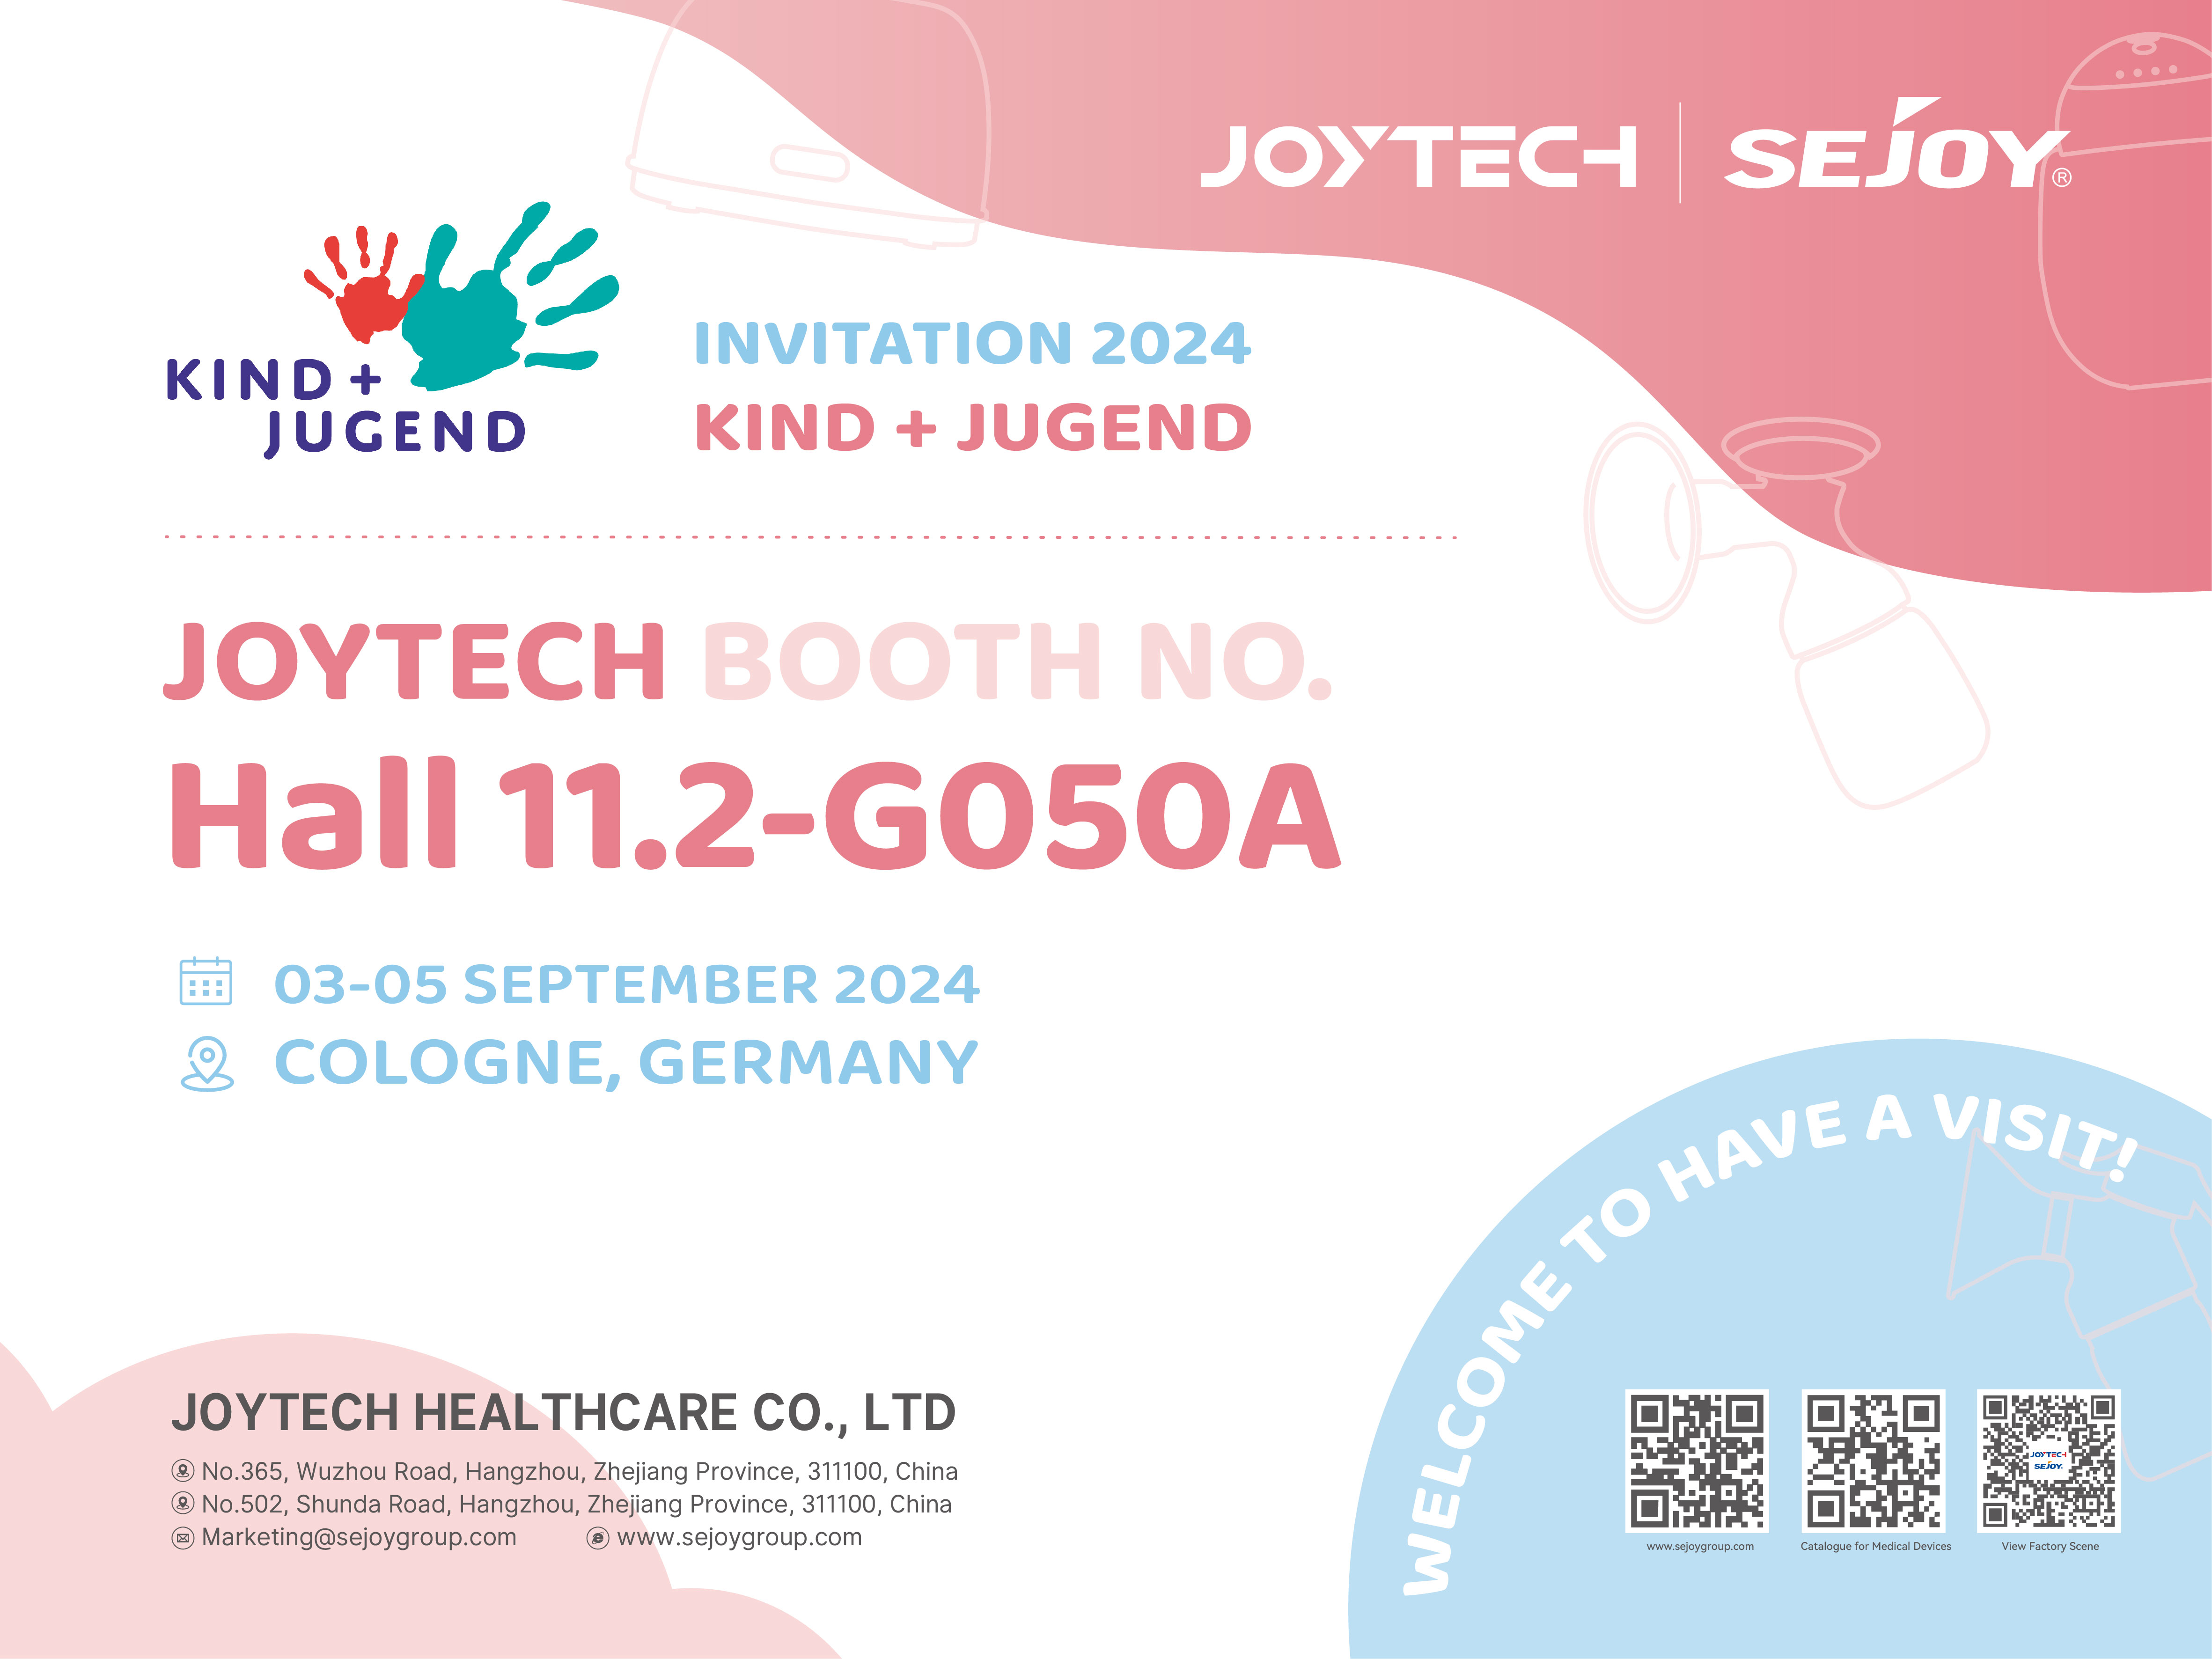 Invitation to Visit Joytech Booth at the Cologne Baby and Child Product Fair Kind+Jugend